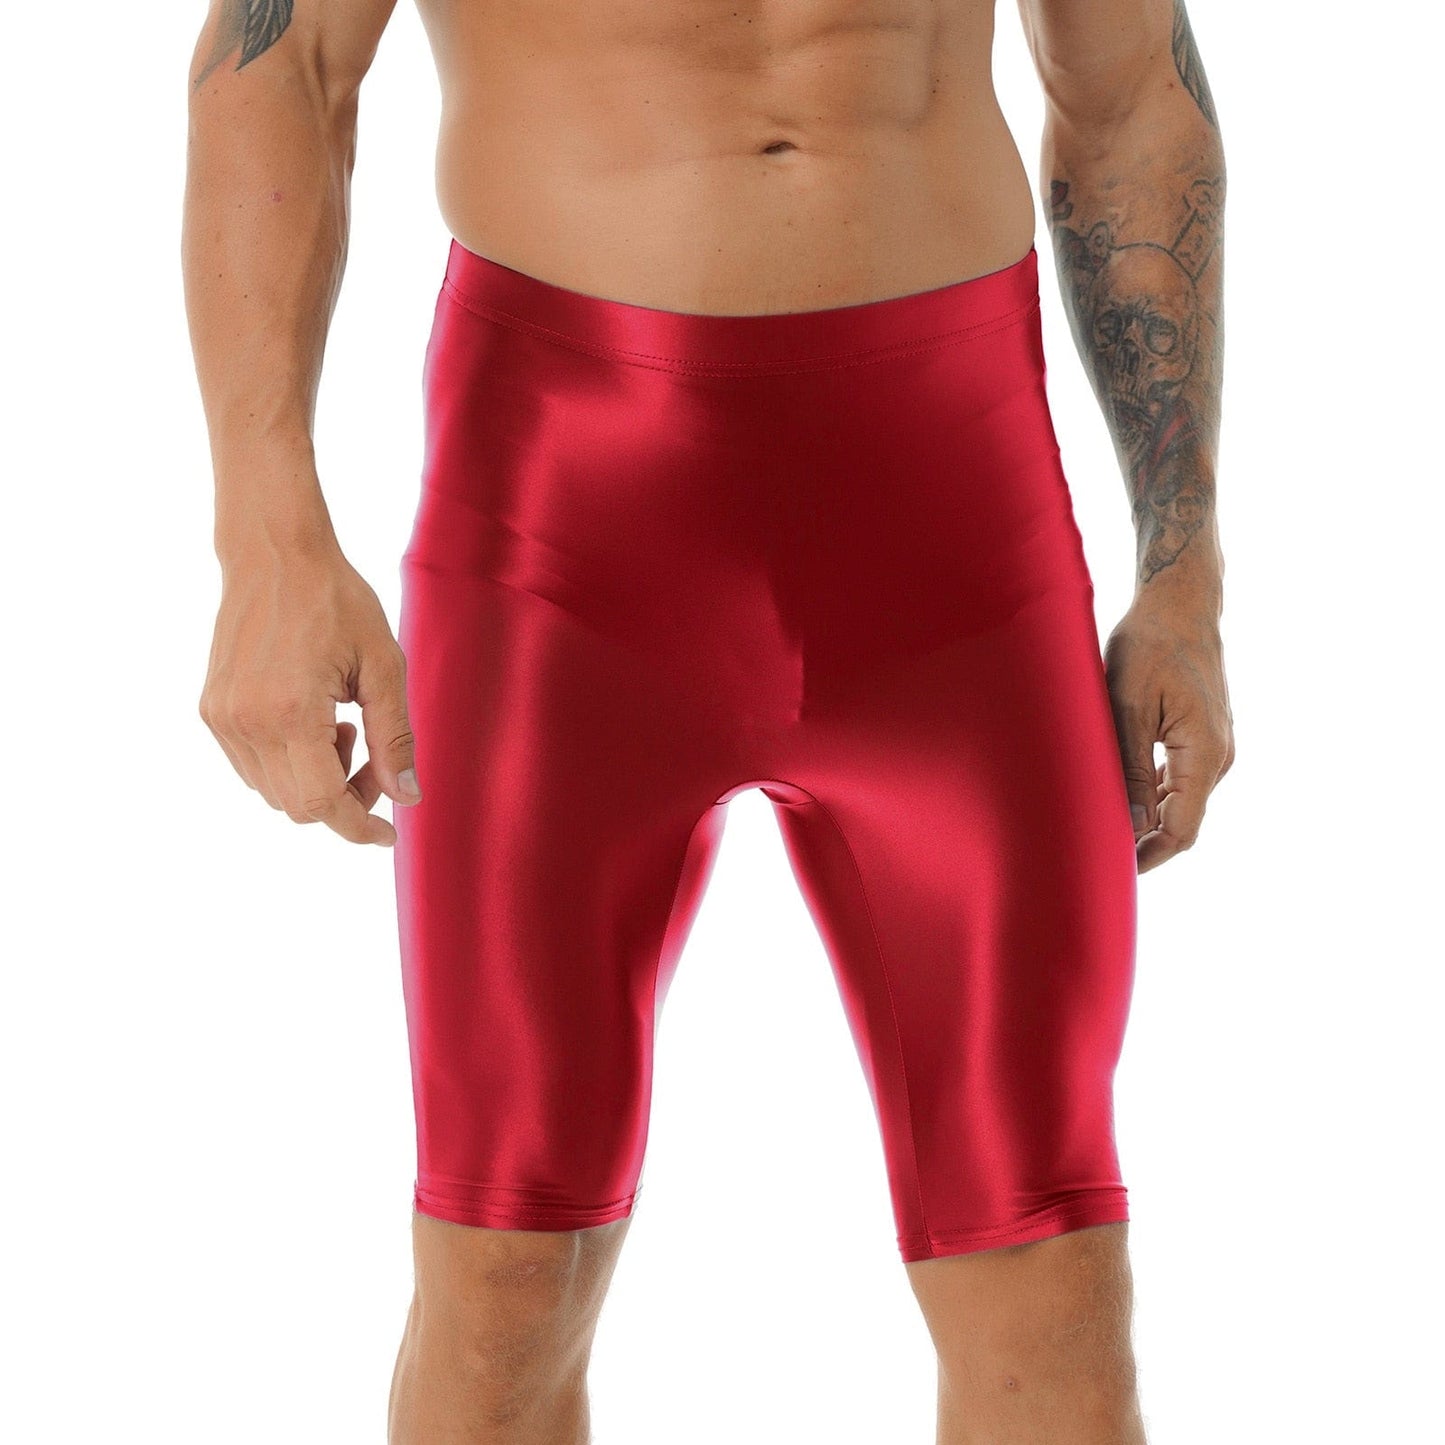 Kinky Cloth Red / M / 1pc Mens Glossy Swimsuit Shorts